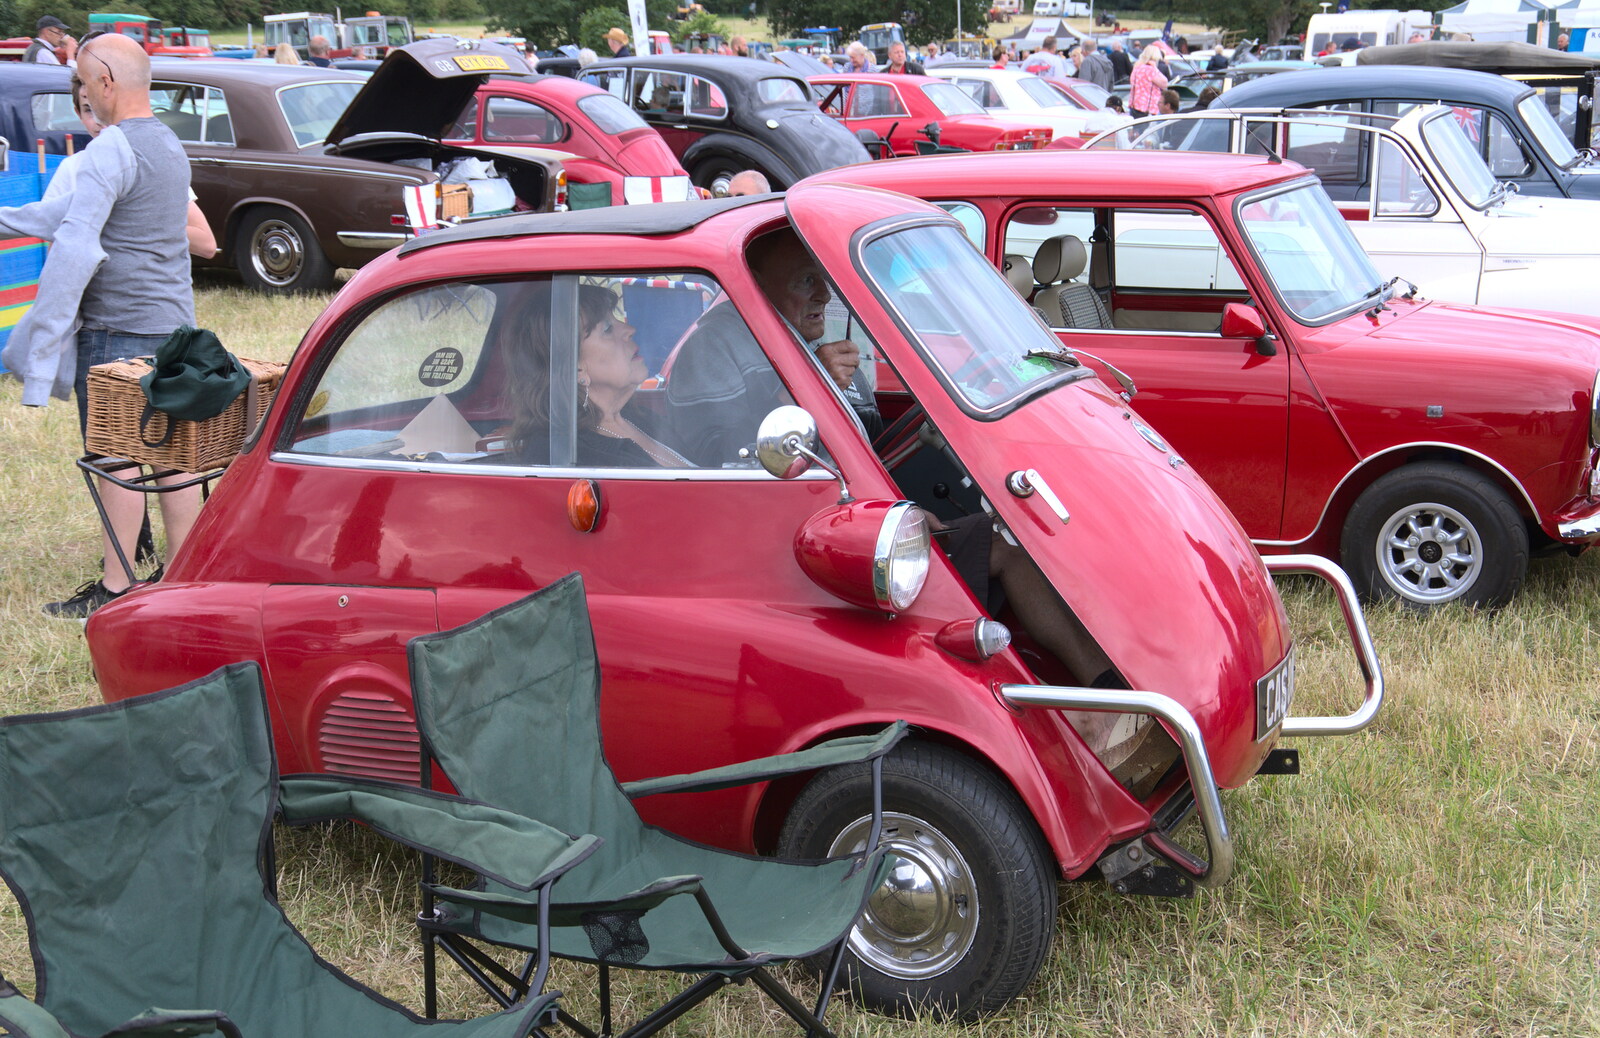 A tiny three-wheeled BMW from The Formerly-Known-As-The-Eye-Show, Palgrave, Suffolk - 17th June 2018